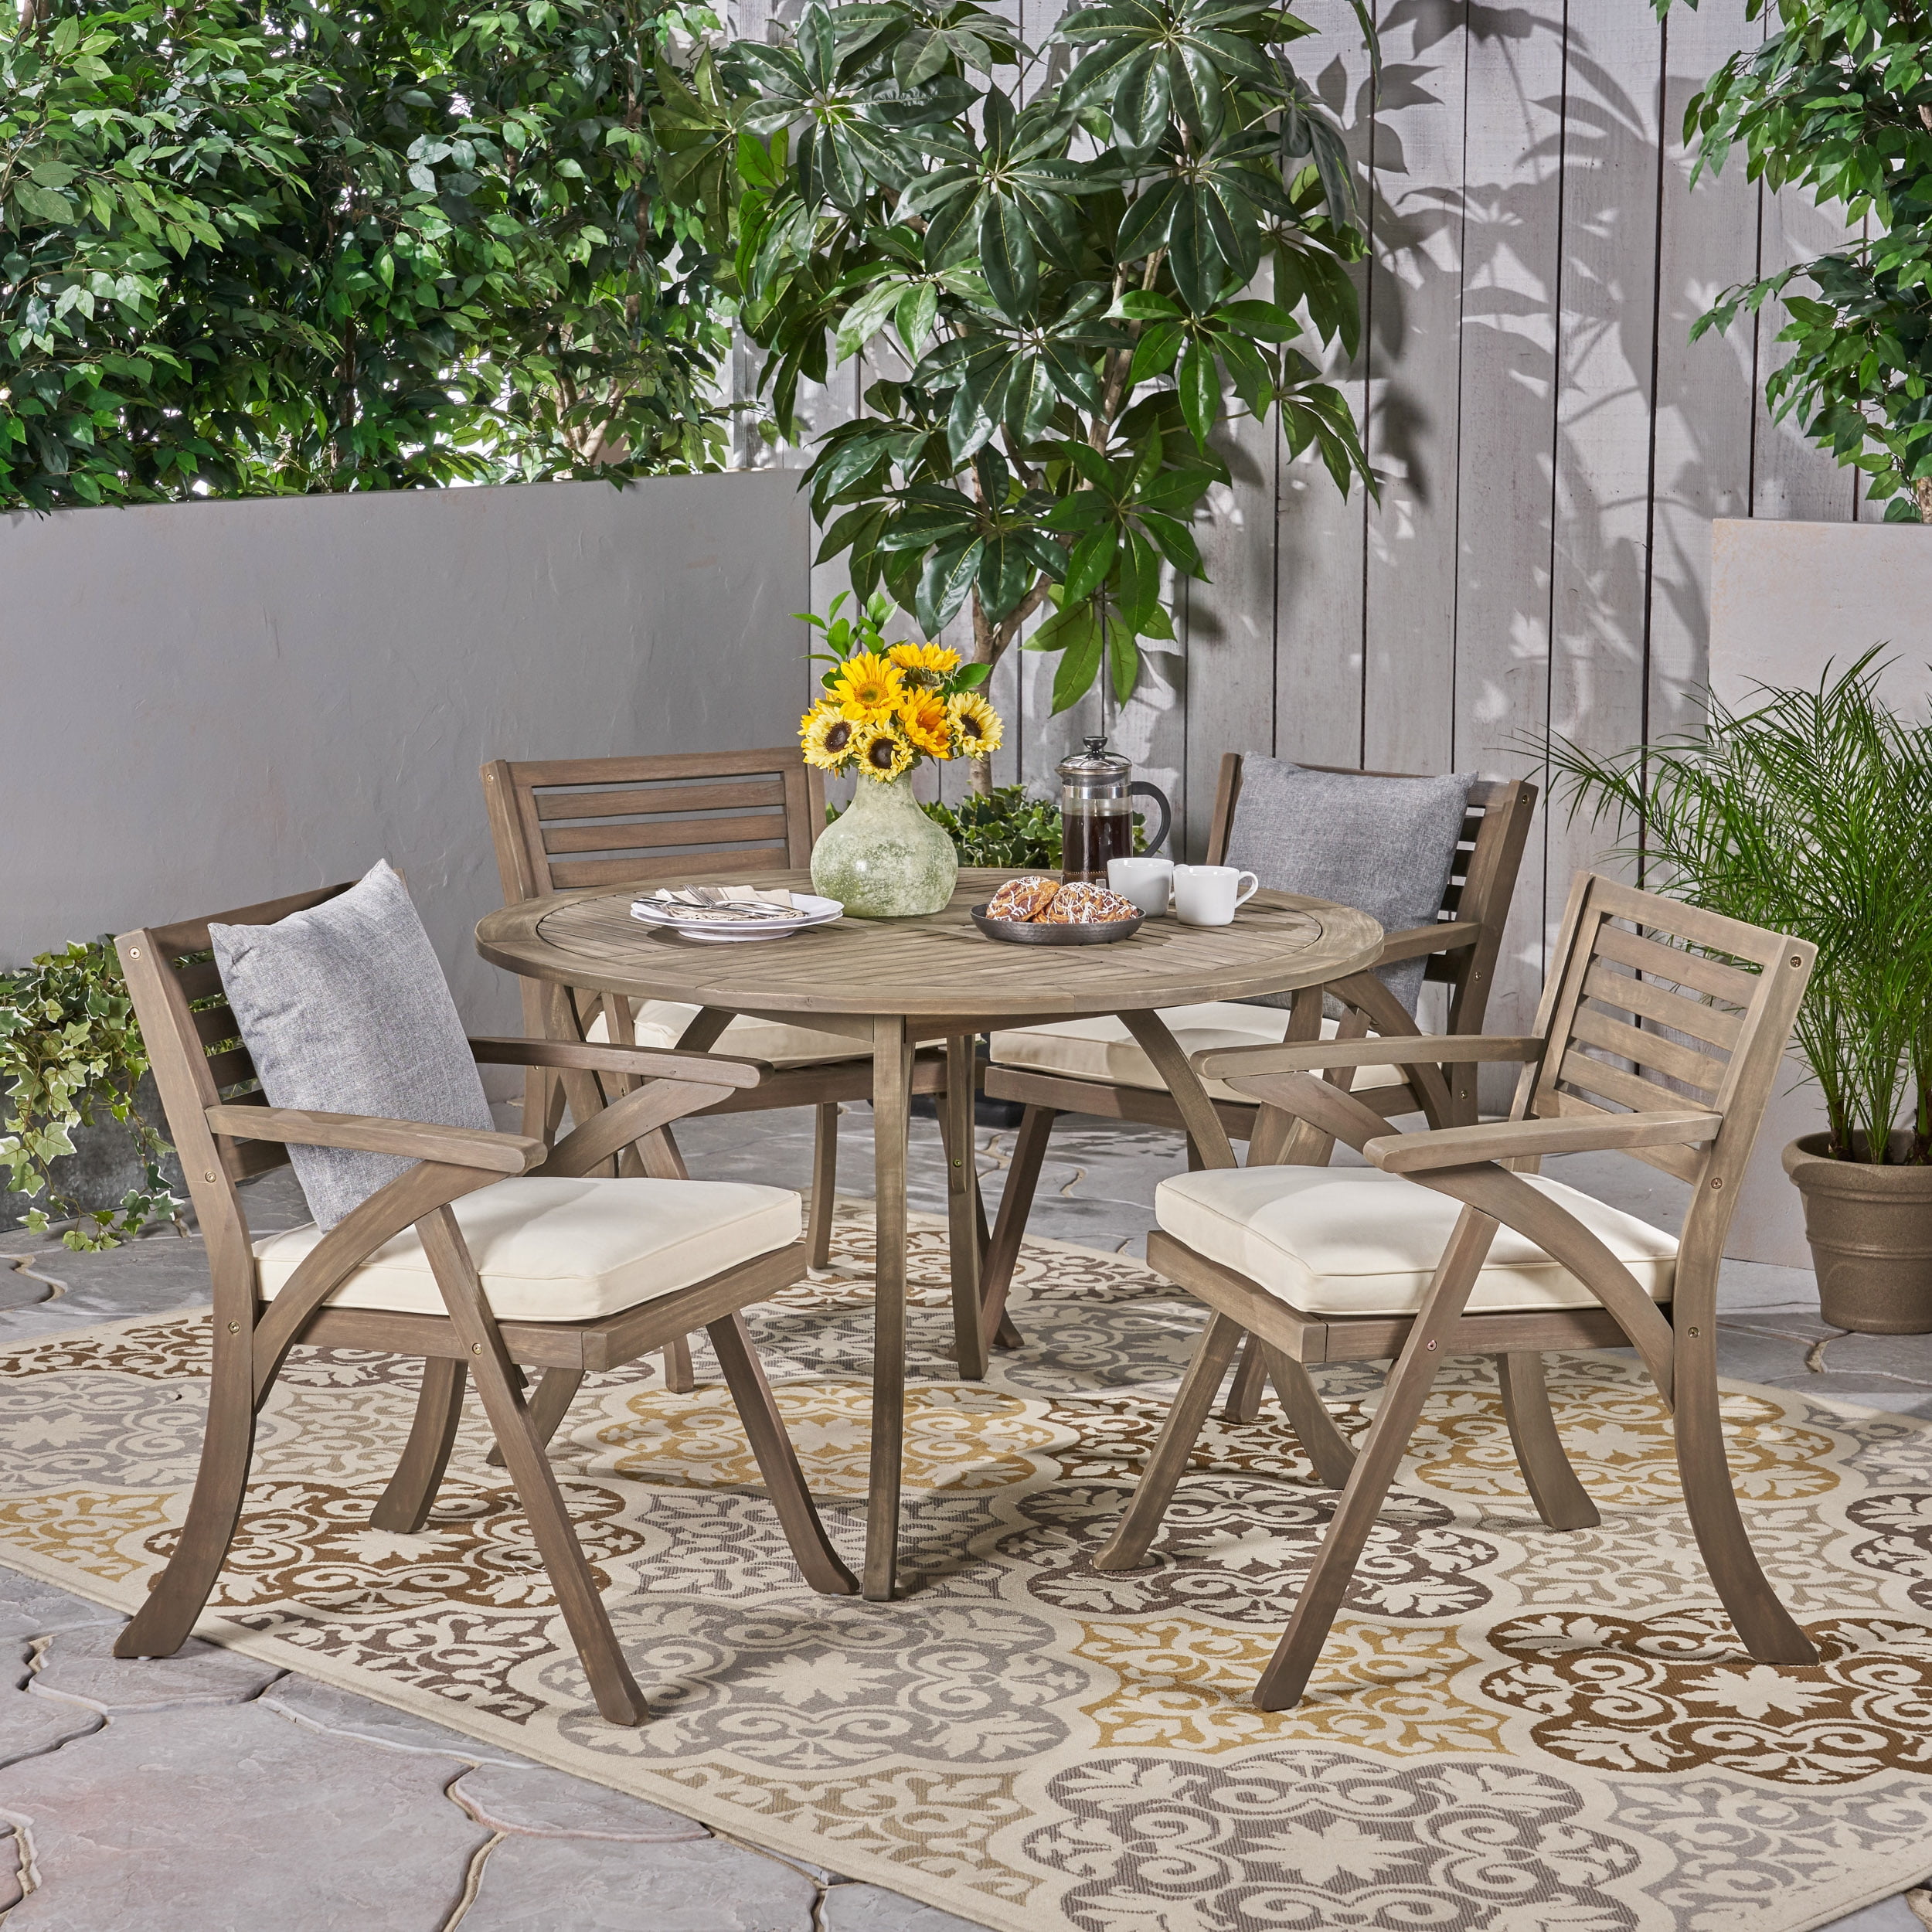 Jordy Outdoor 5 Piece Acacia Wood Dining Set with Round Table, Gray